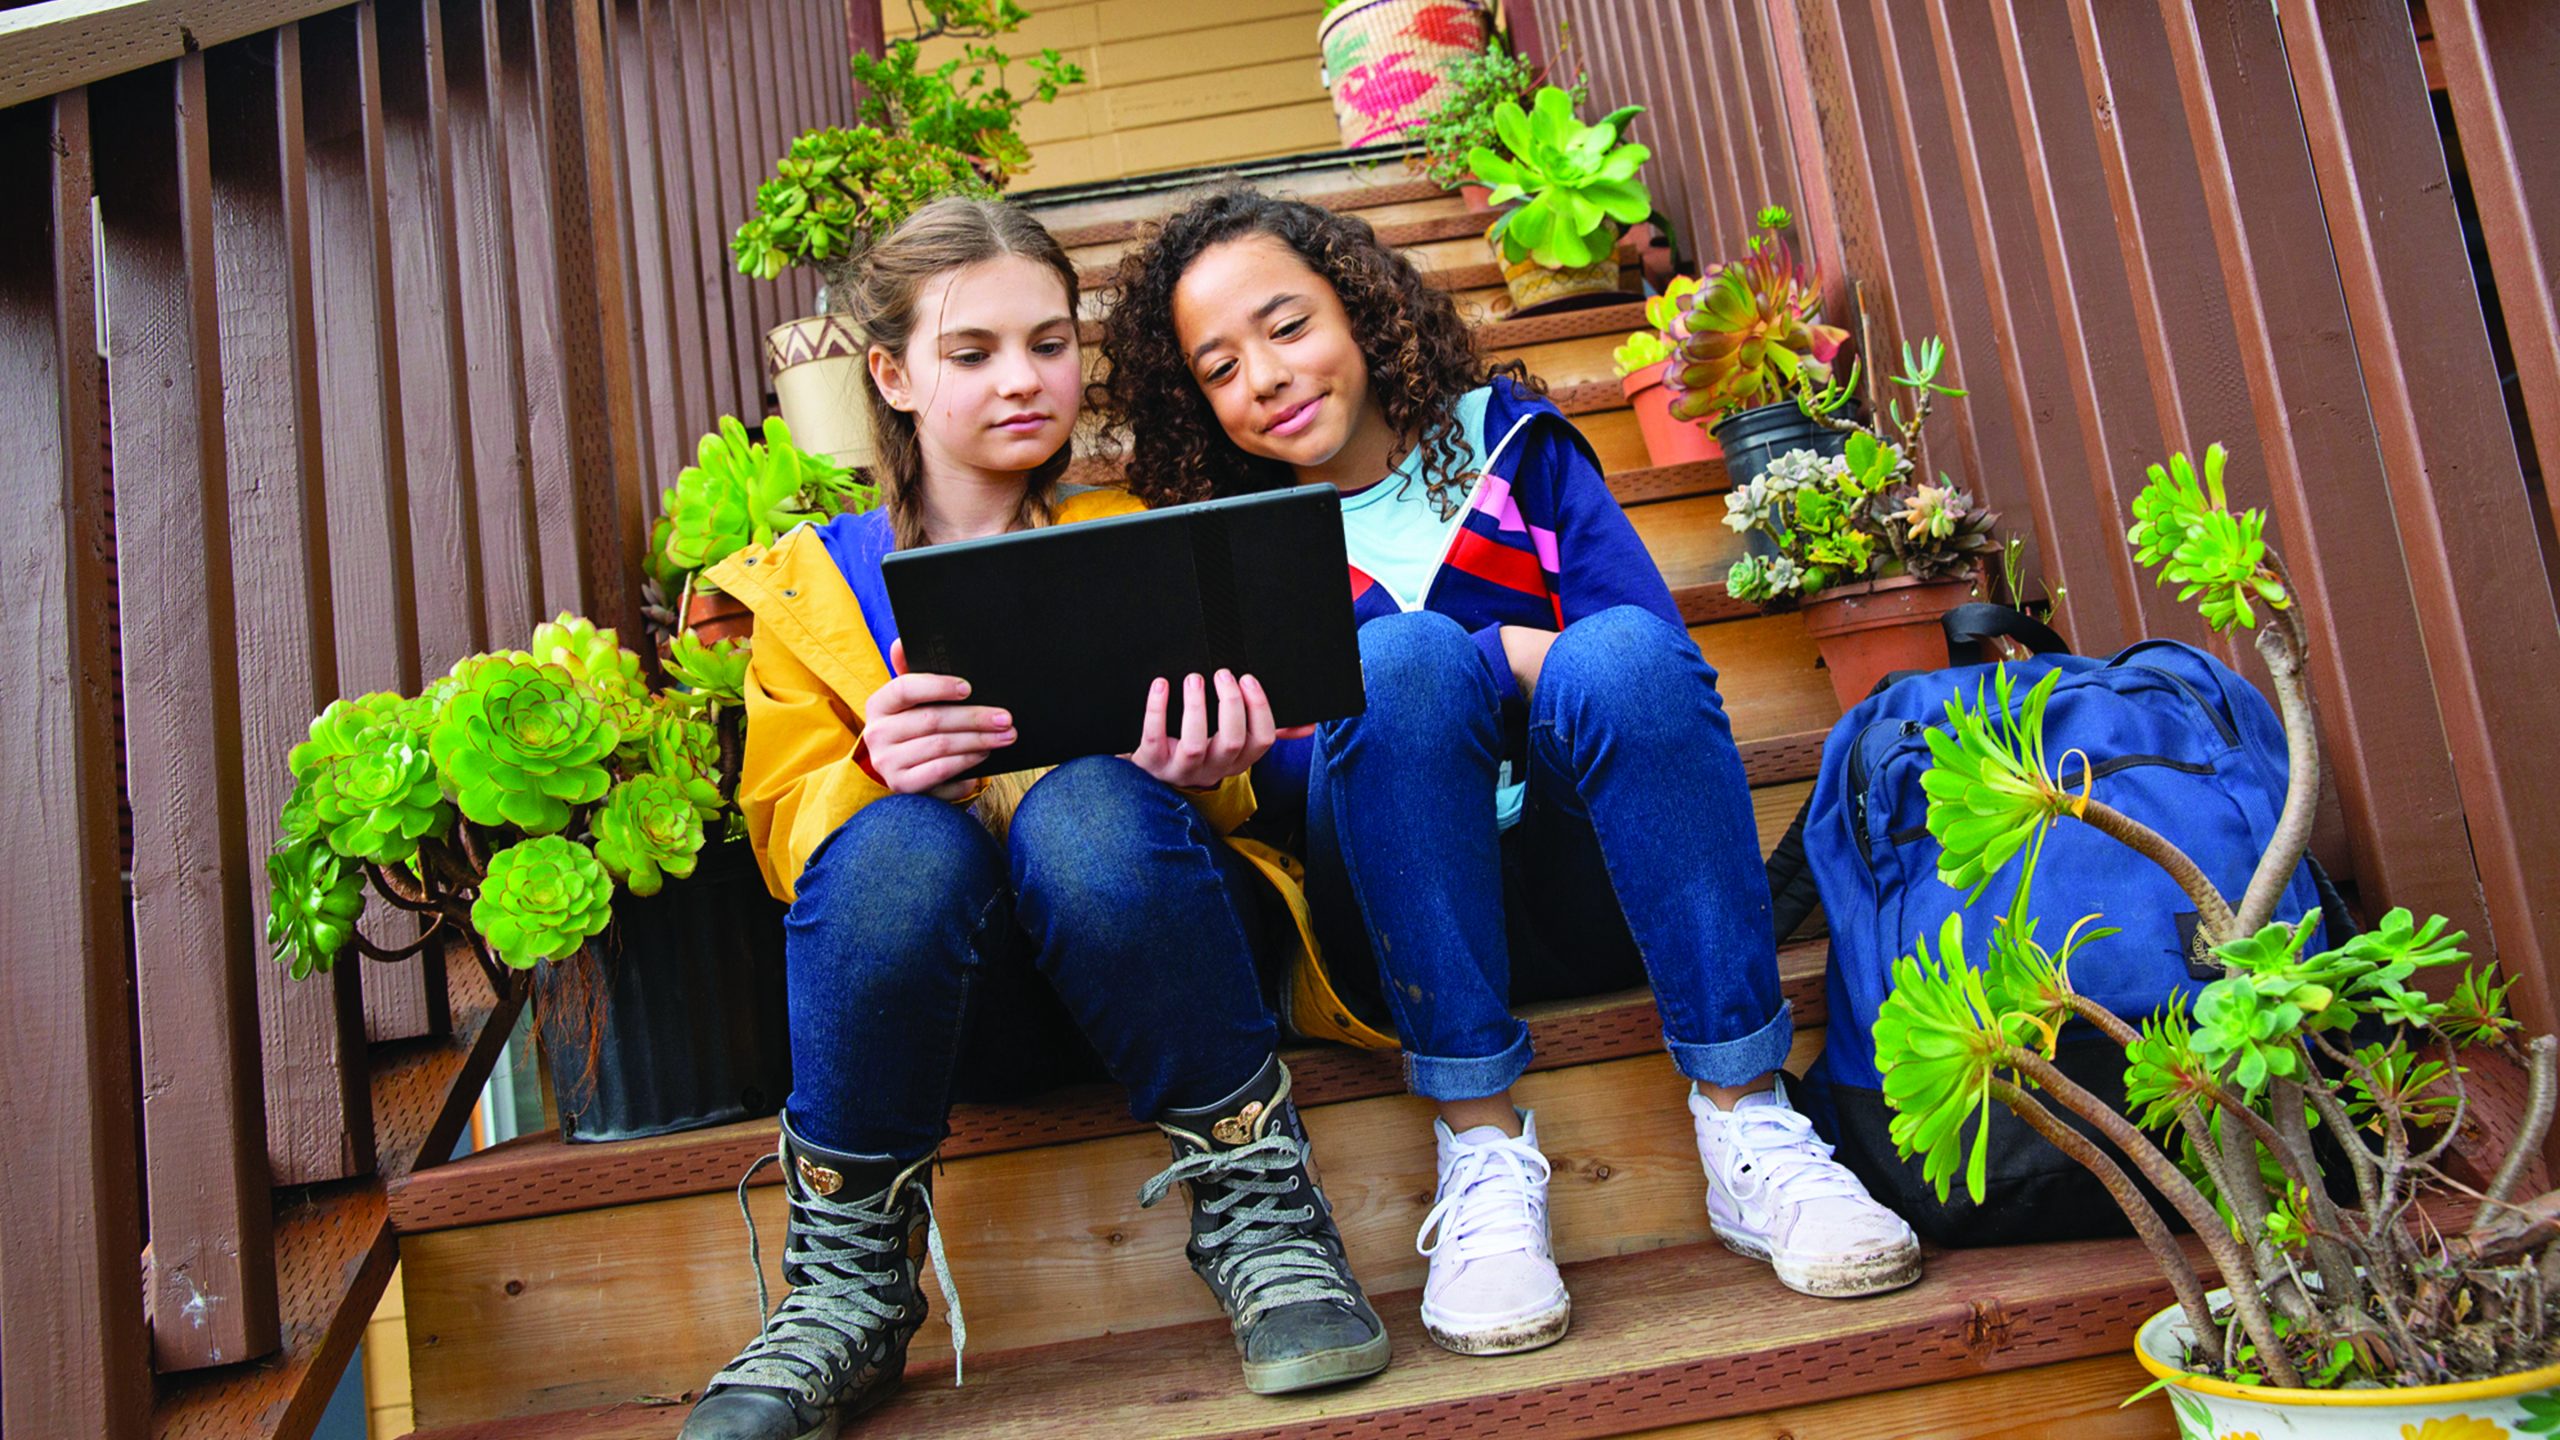 two girls sitting on outdoor steps, looking at a laptop screen